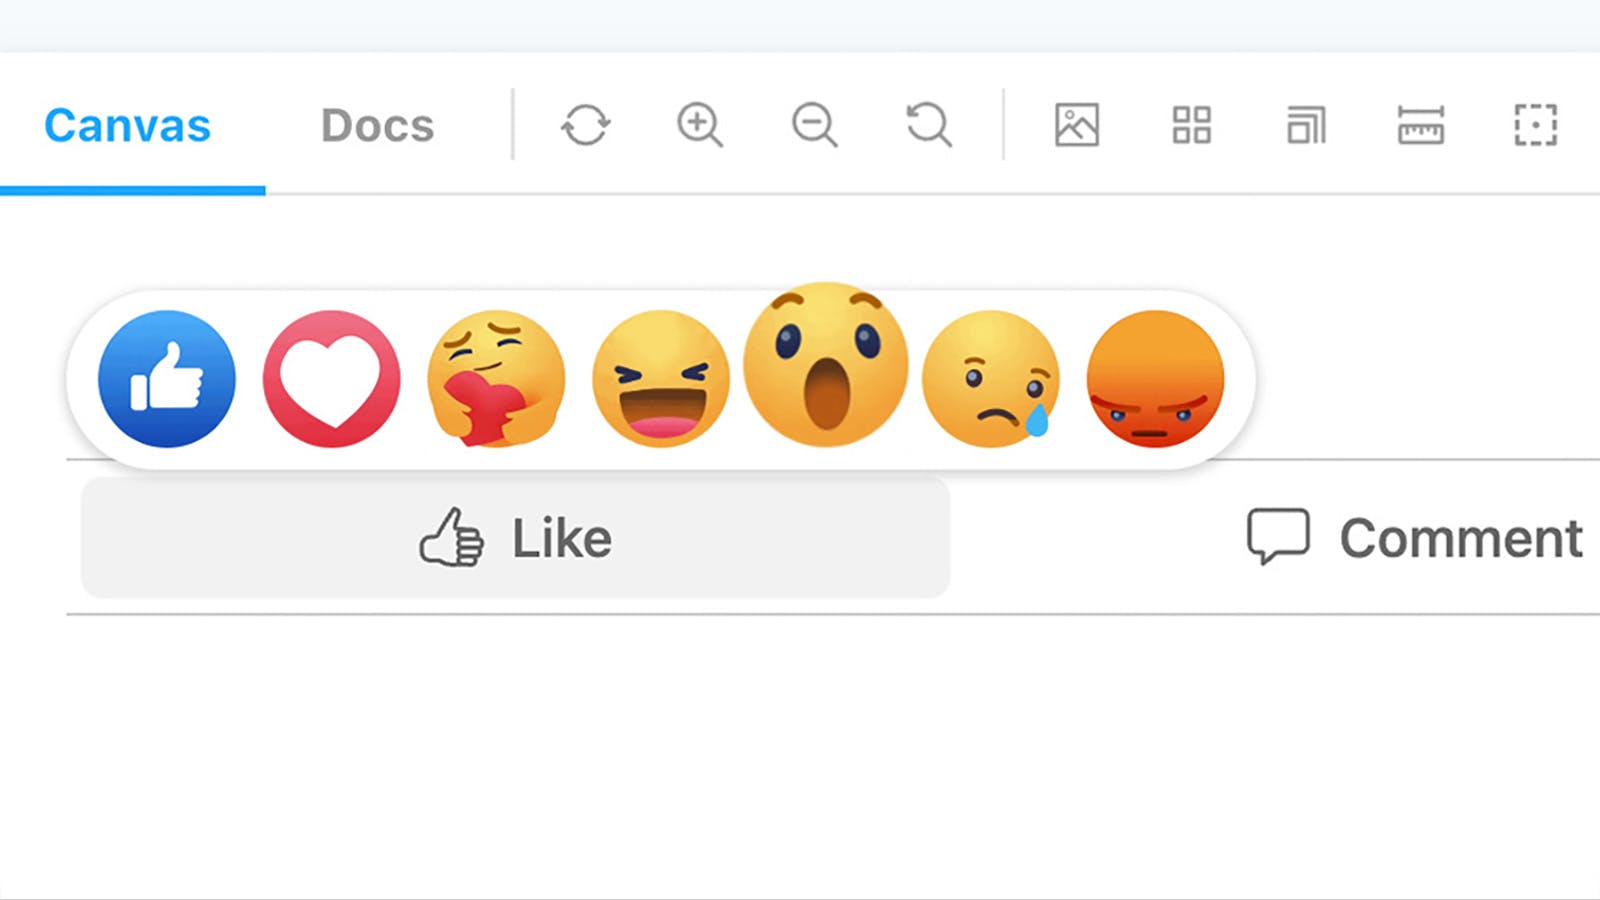 Facebook-Style Animated Reactions